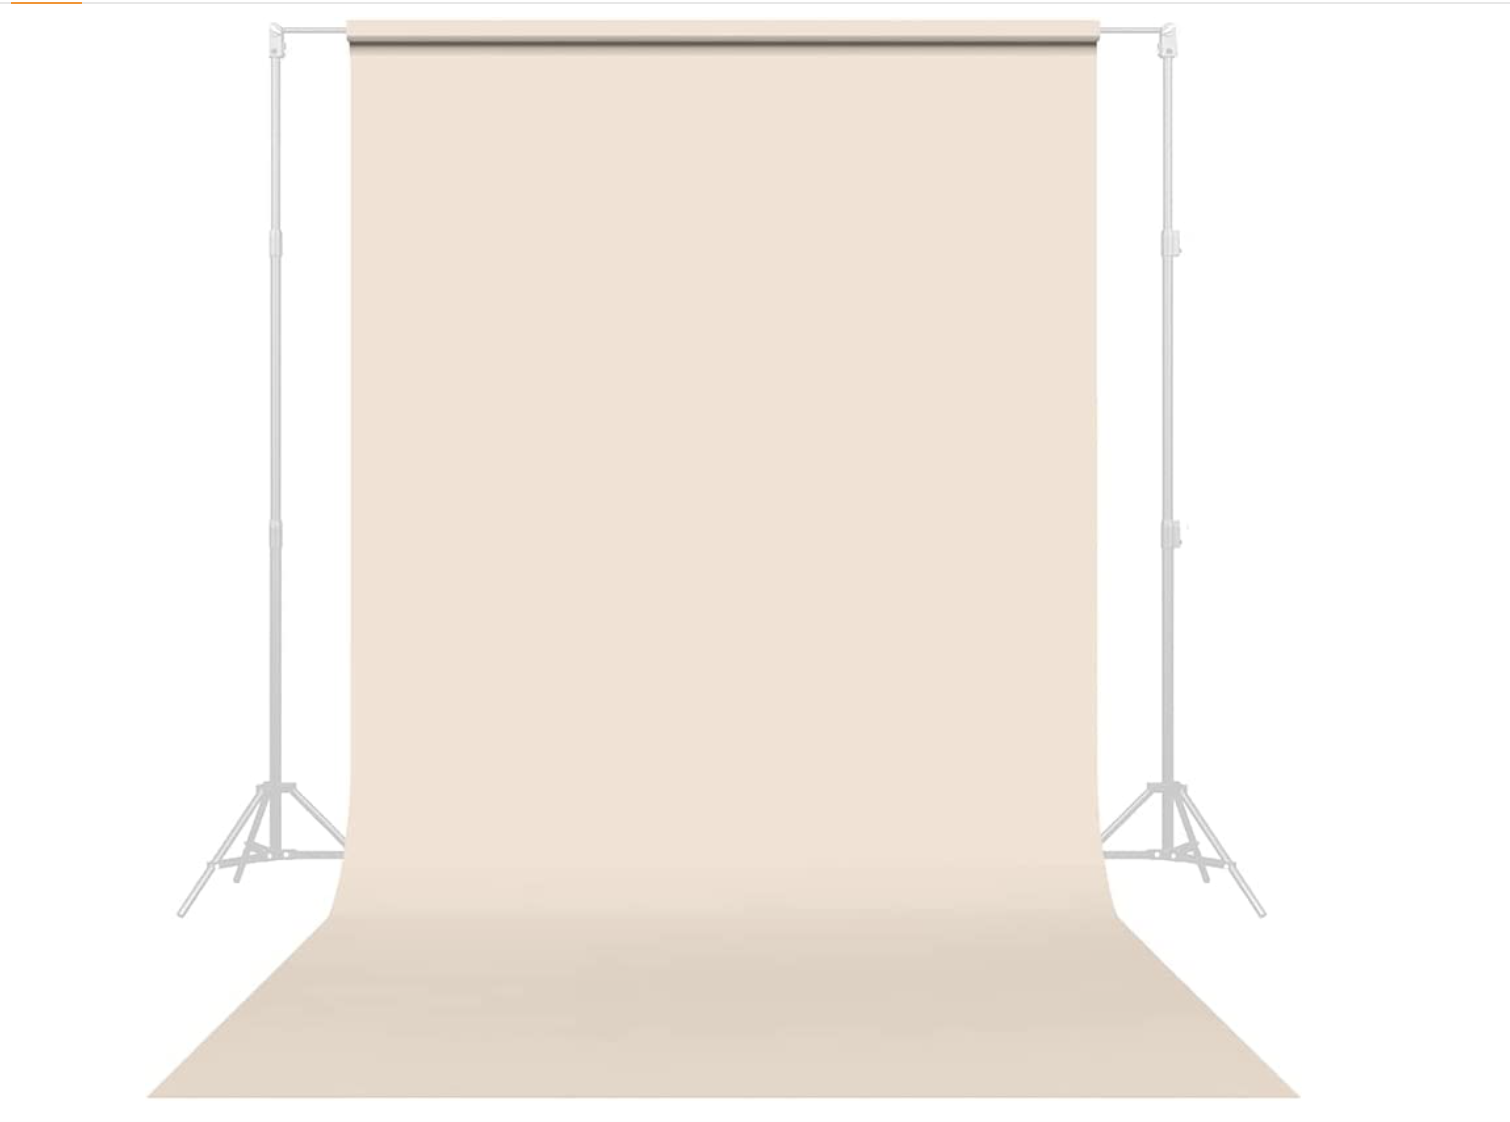 A photography backdrop in a tan color